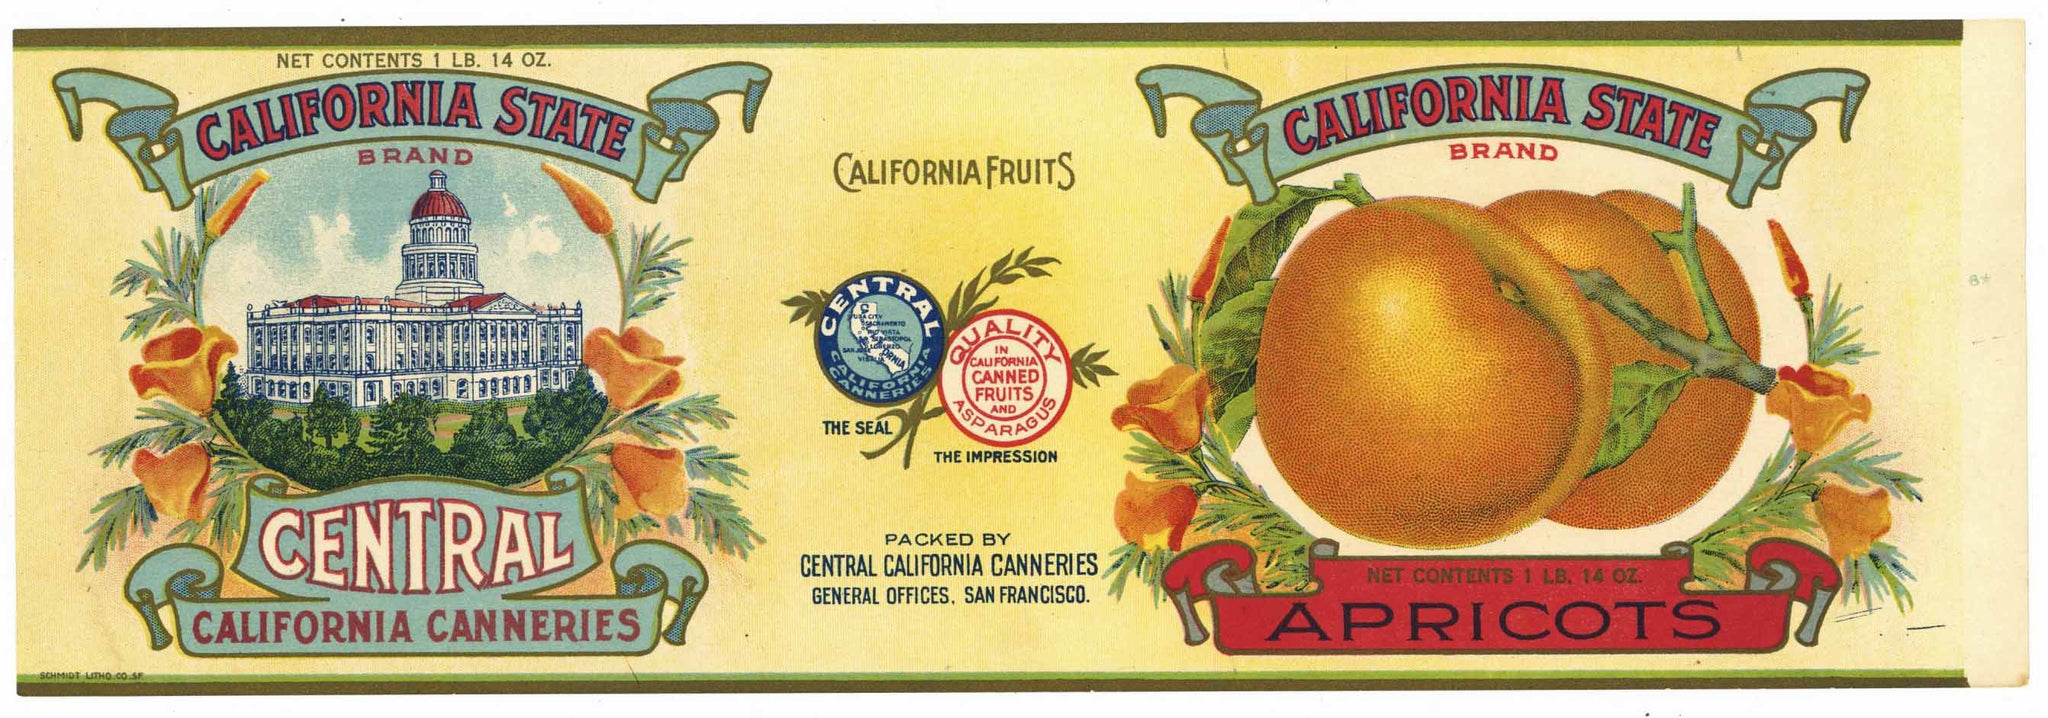 California State Brand Vintage Apricot Can Label, Capitol